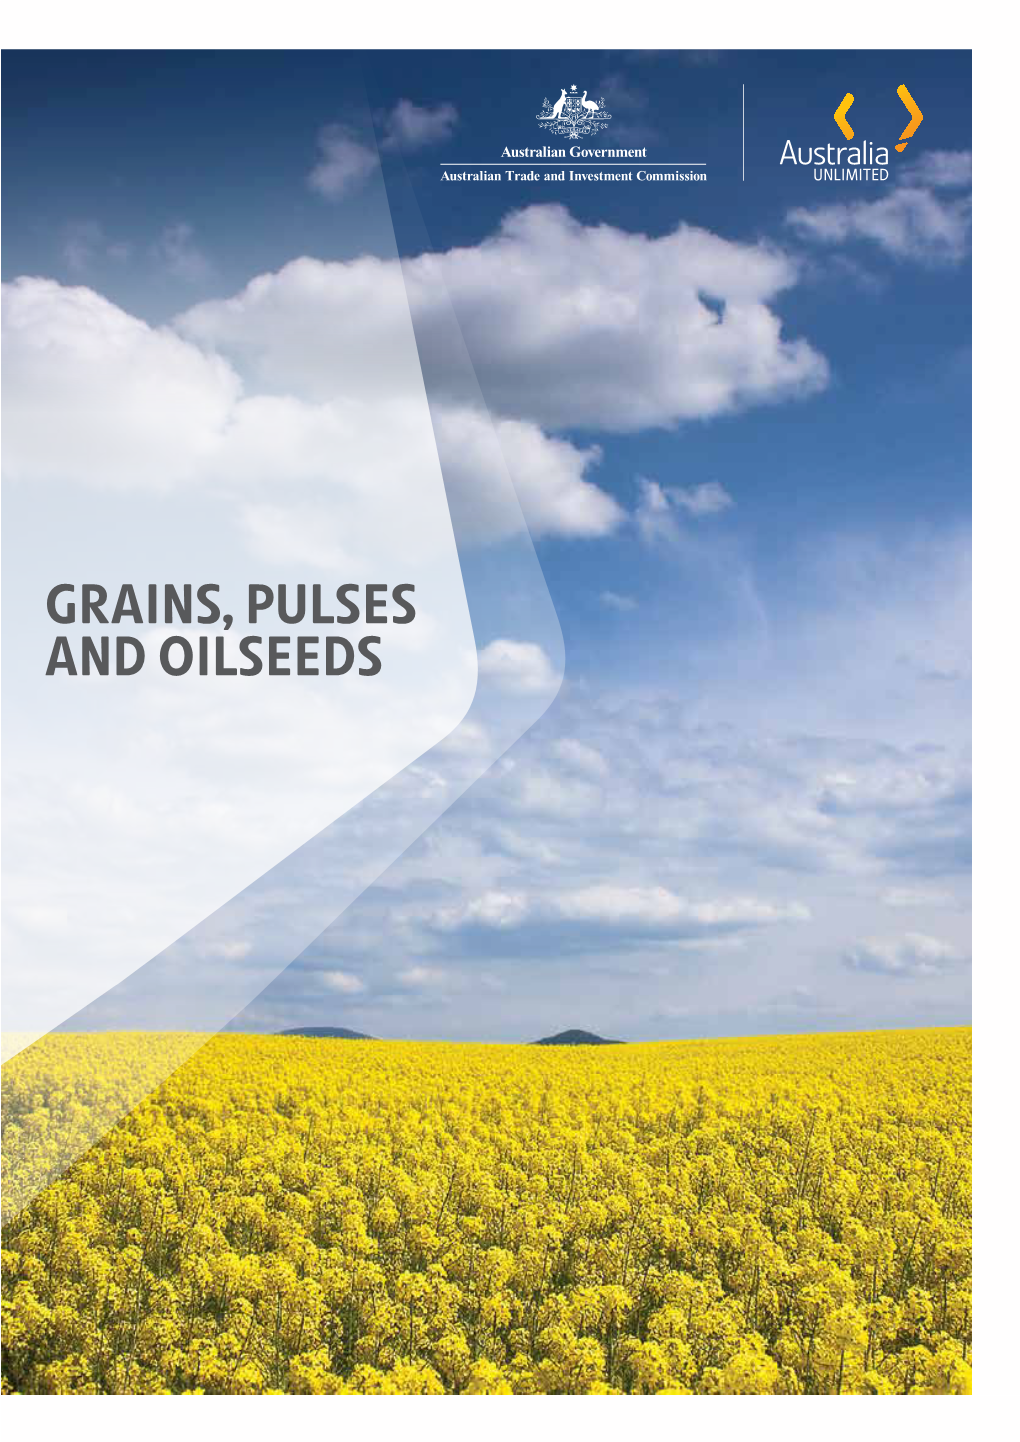 Grains, Pulses and Oilseeds Capability